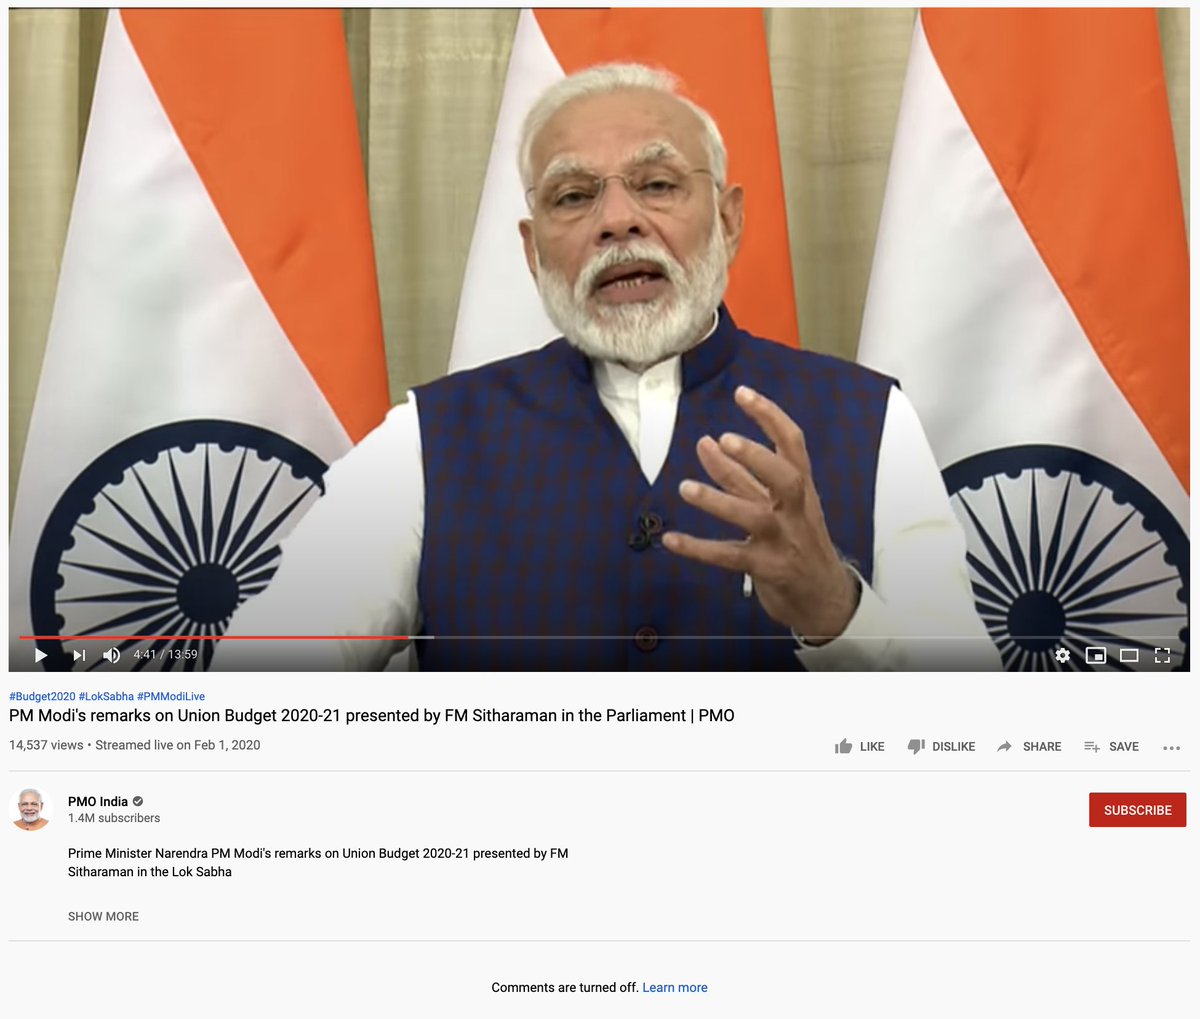 3/3 That turns many of the PM's videos into pure broadcast. If you have any view or opinion about them, keep it to yourself or share it with your friends. Just do not let PMO India know because (a) you can't and (b) they don't want it anymore.